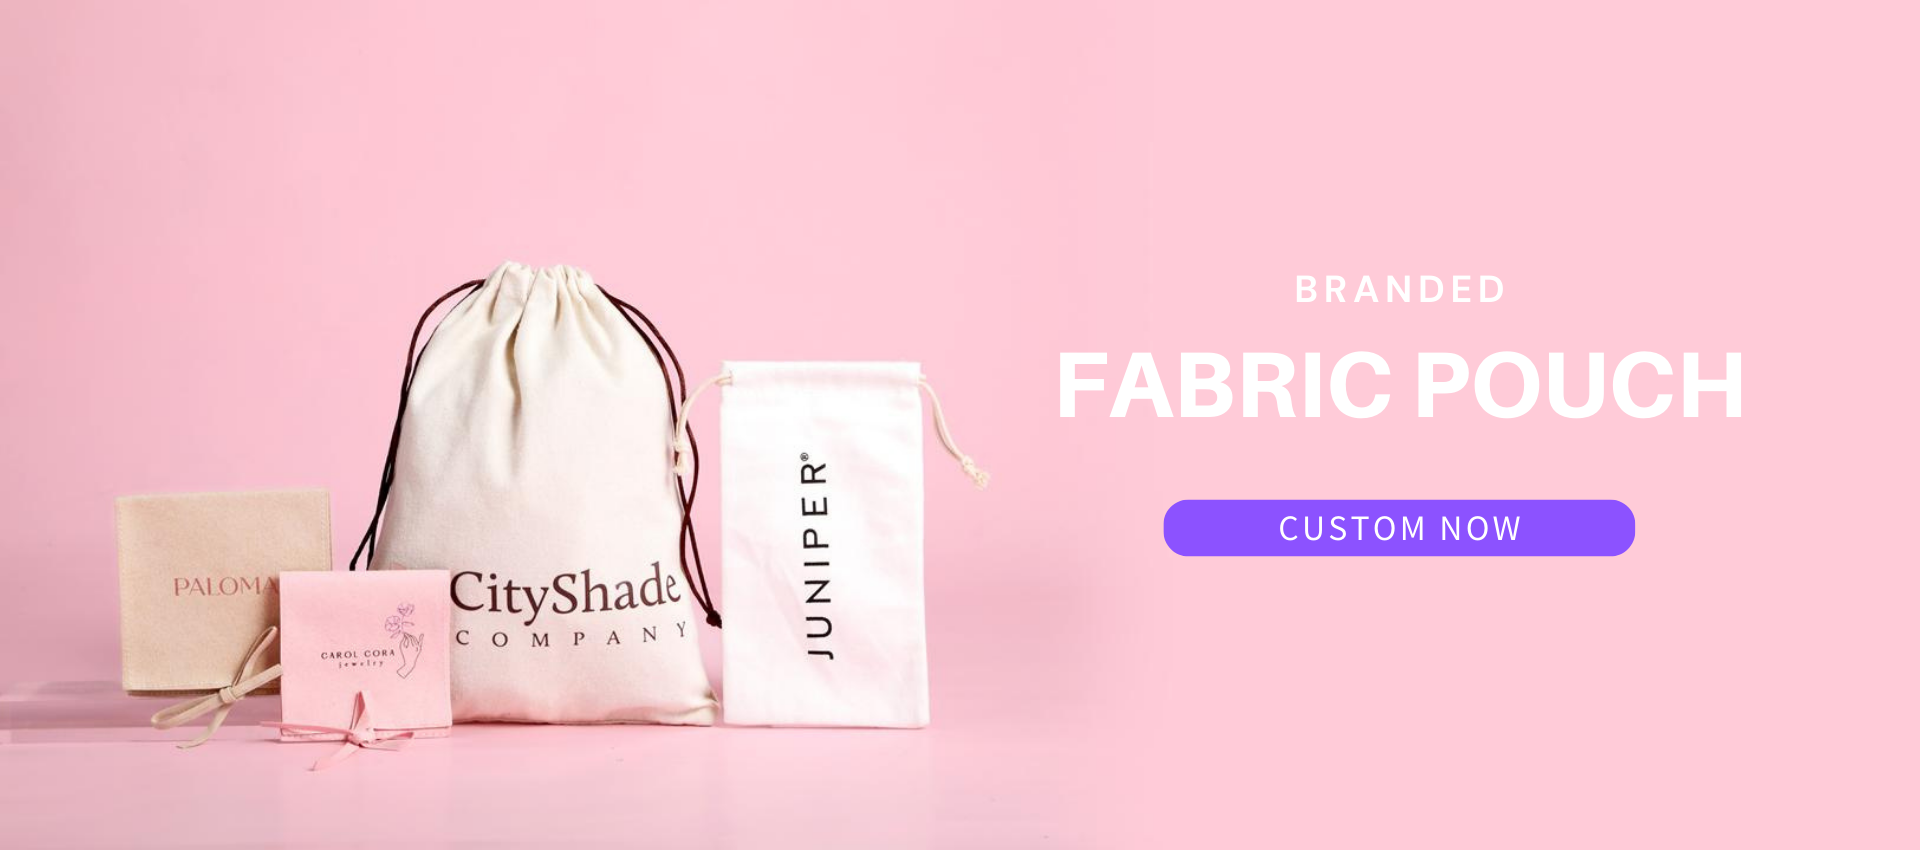 BRANDED FABRIC POUCH